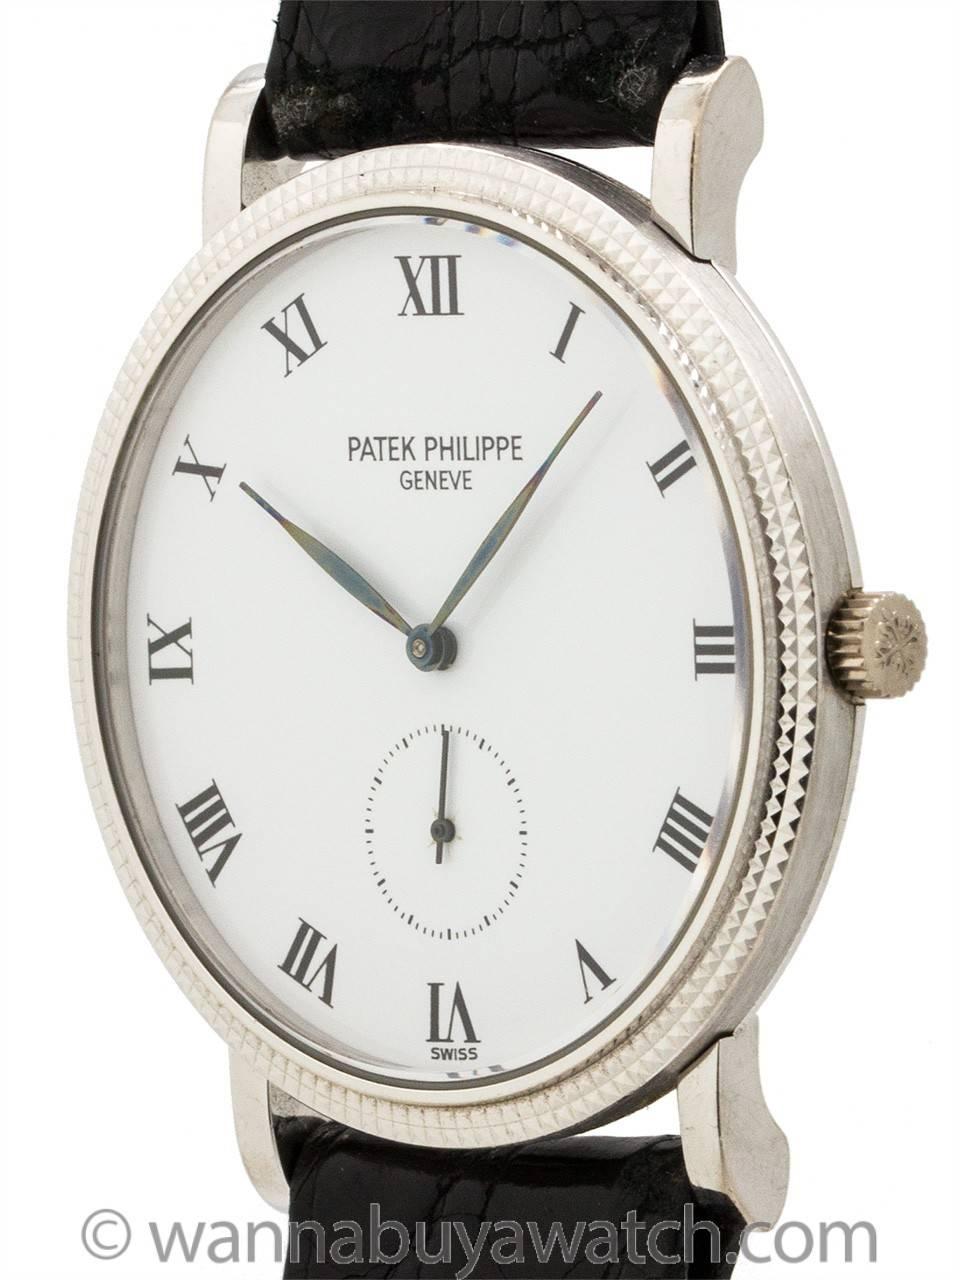 Patek Philippe 18K White Gold Calatrava ref 3919 circa 1990’s. Classic hobnail bezel 33mm diameter case model with snap on back. White enamel dial with Roman indexes and tapered blued steel leaf style hands. Powered by 18 jewel manual wind movement